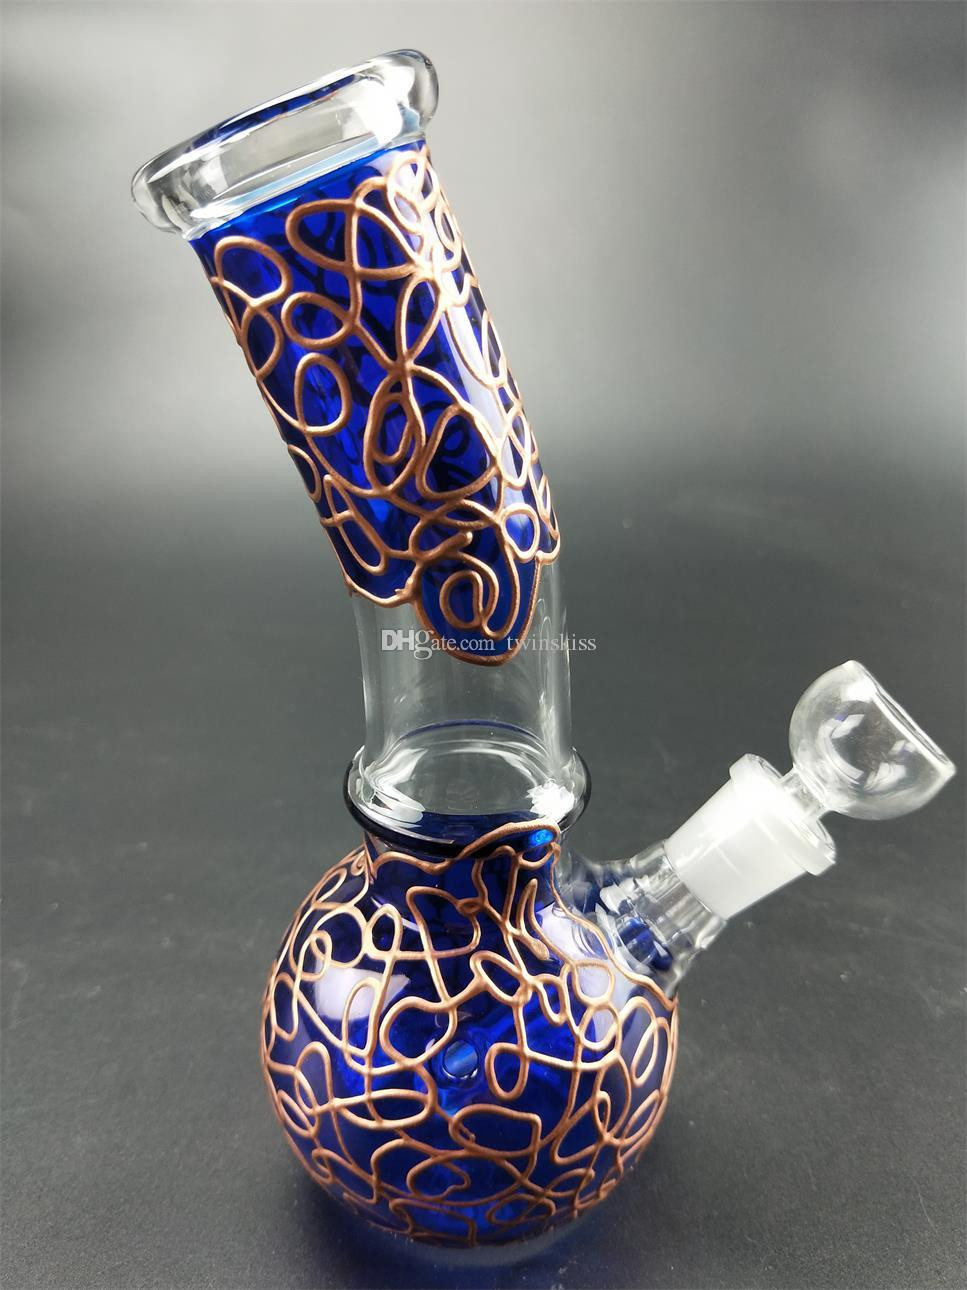 Small Cobalt Blue Vase Of 2018 Blue Glass Water Smoke Pipe Filter Recycled Glass Water Pipes Inside 2018 Blue Glass Water Smoke Pipe Filter Recycled Glass Water Pipes Low Price and High Quality From Twinskiss 18 6 Dhgate Com